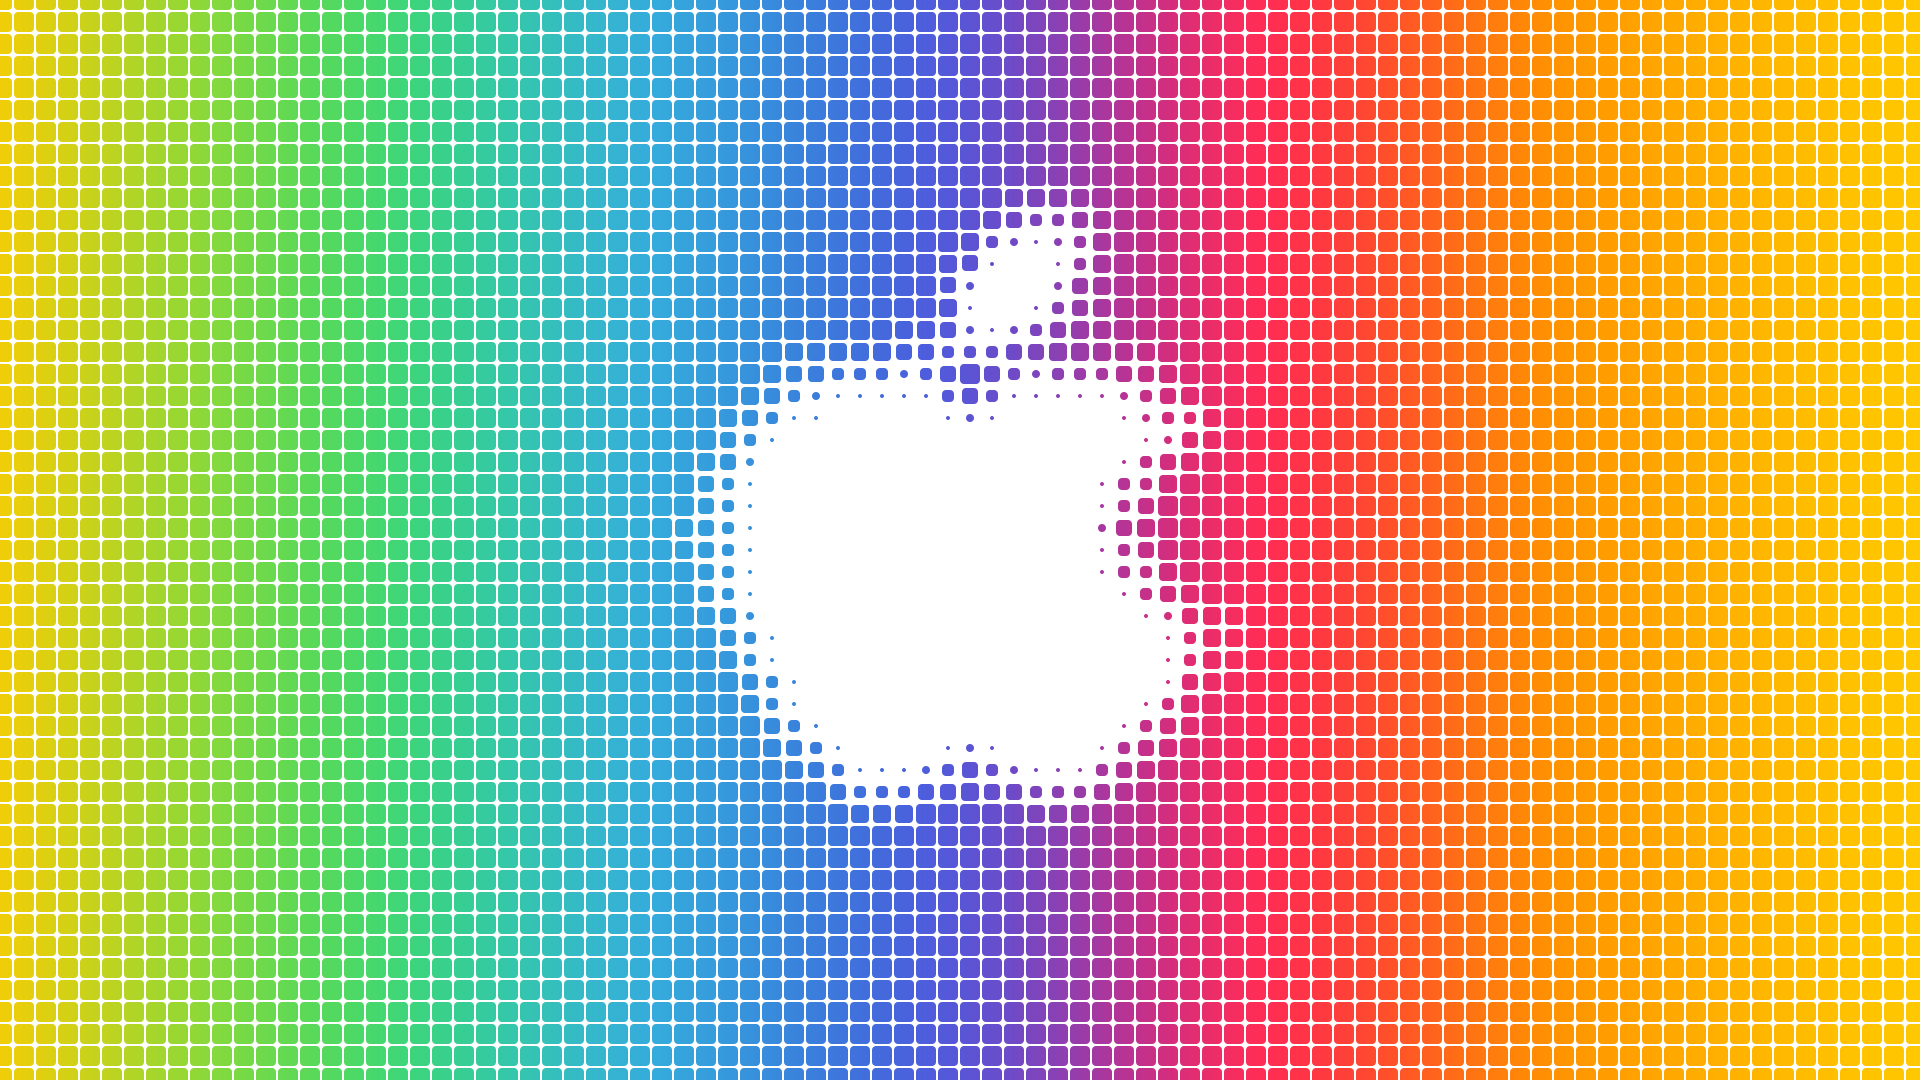 Wwdc Wallpaper For Your iPhone iPad And Mac